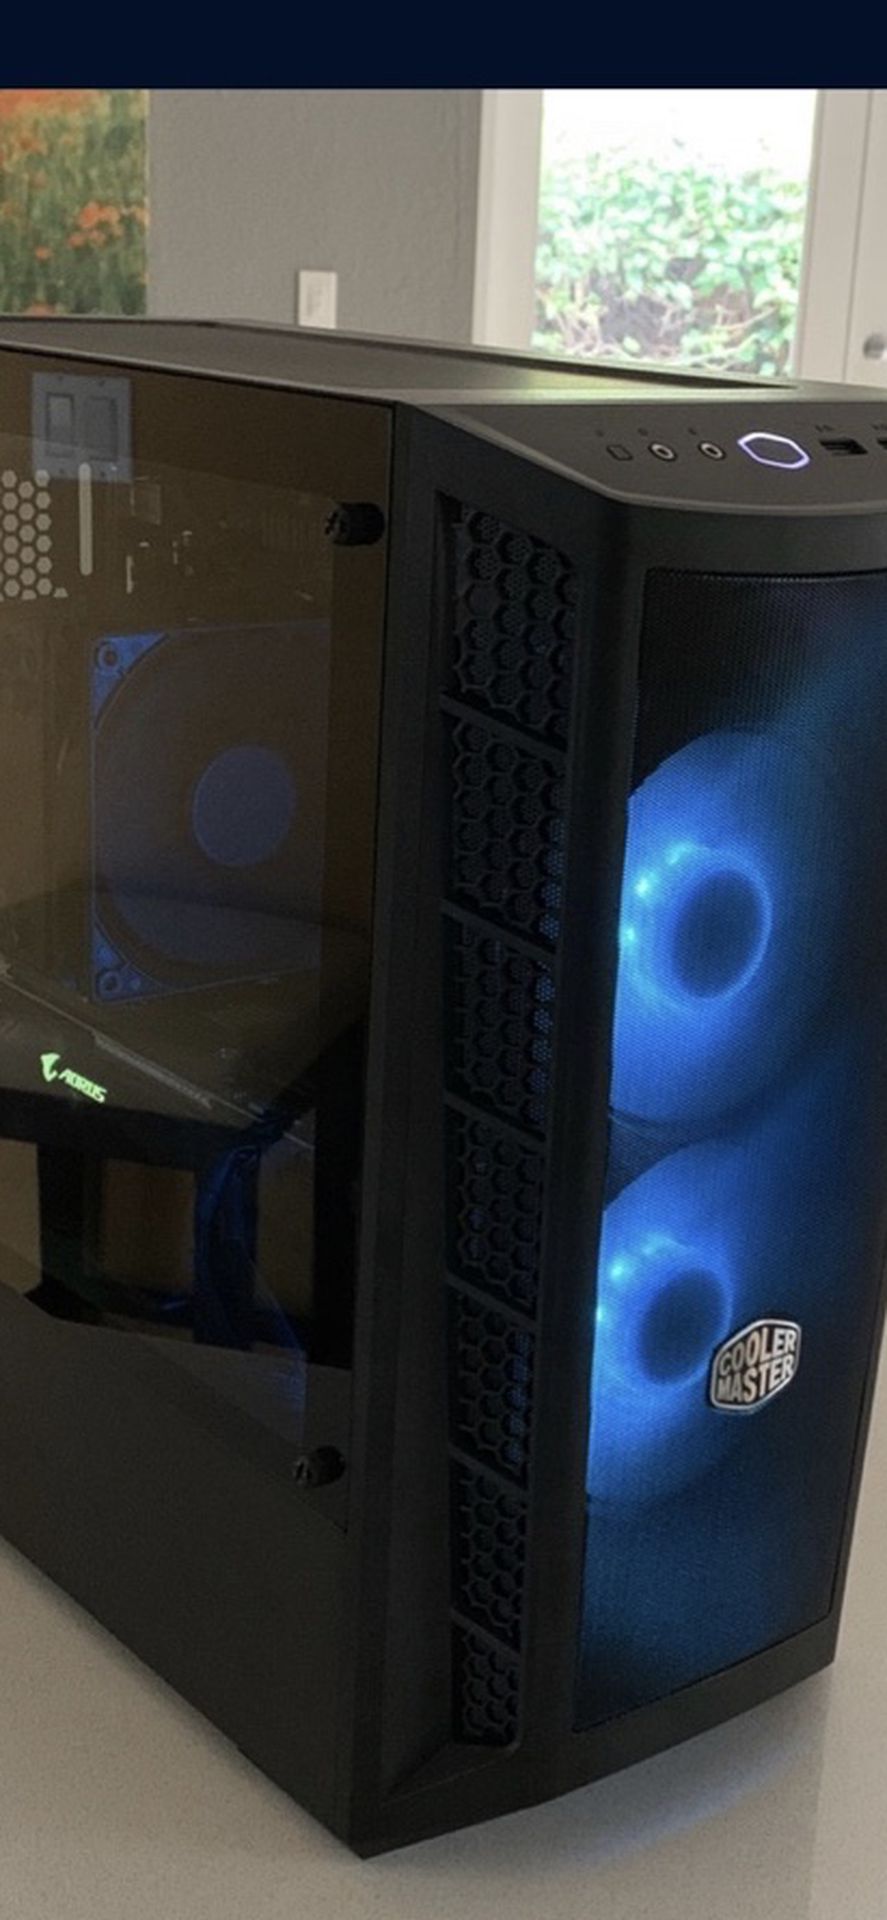 Custom Built AMD Gaming PC ($761.58 Was The Total Cost For All Parts)